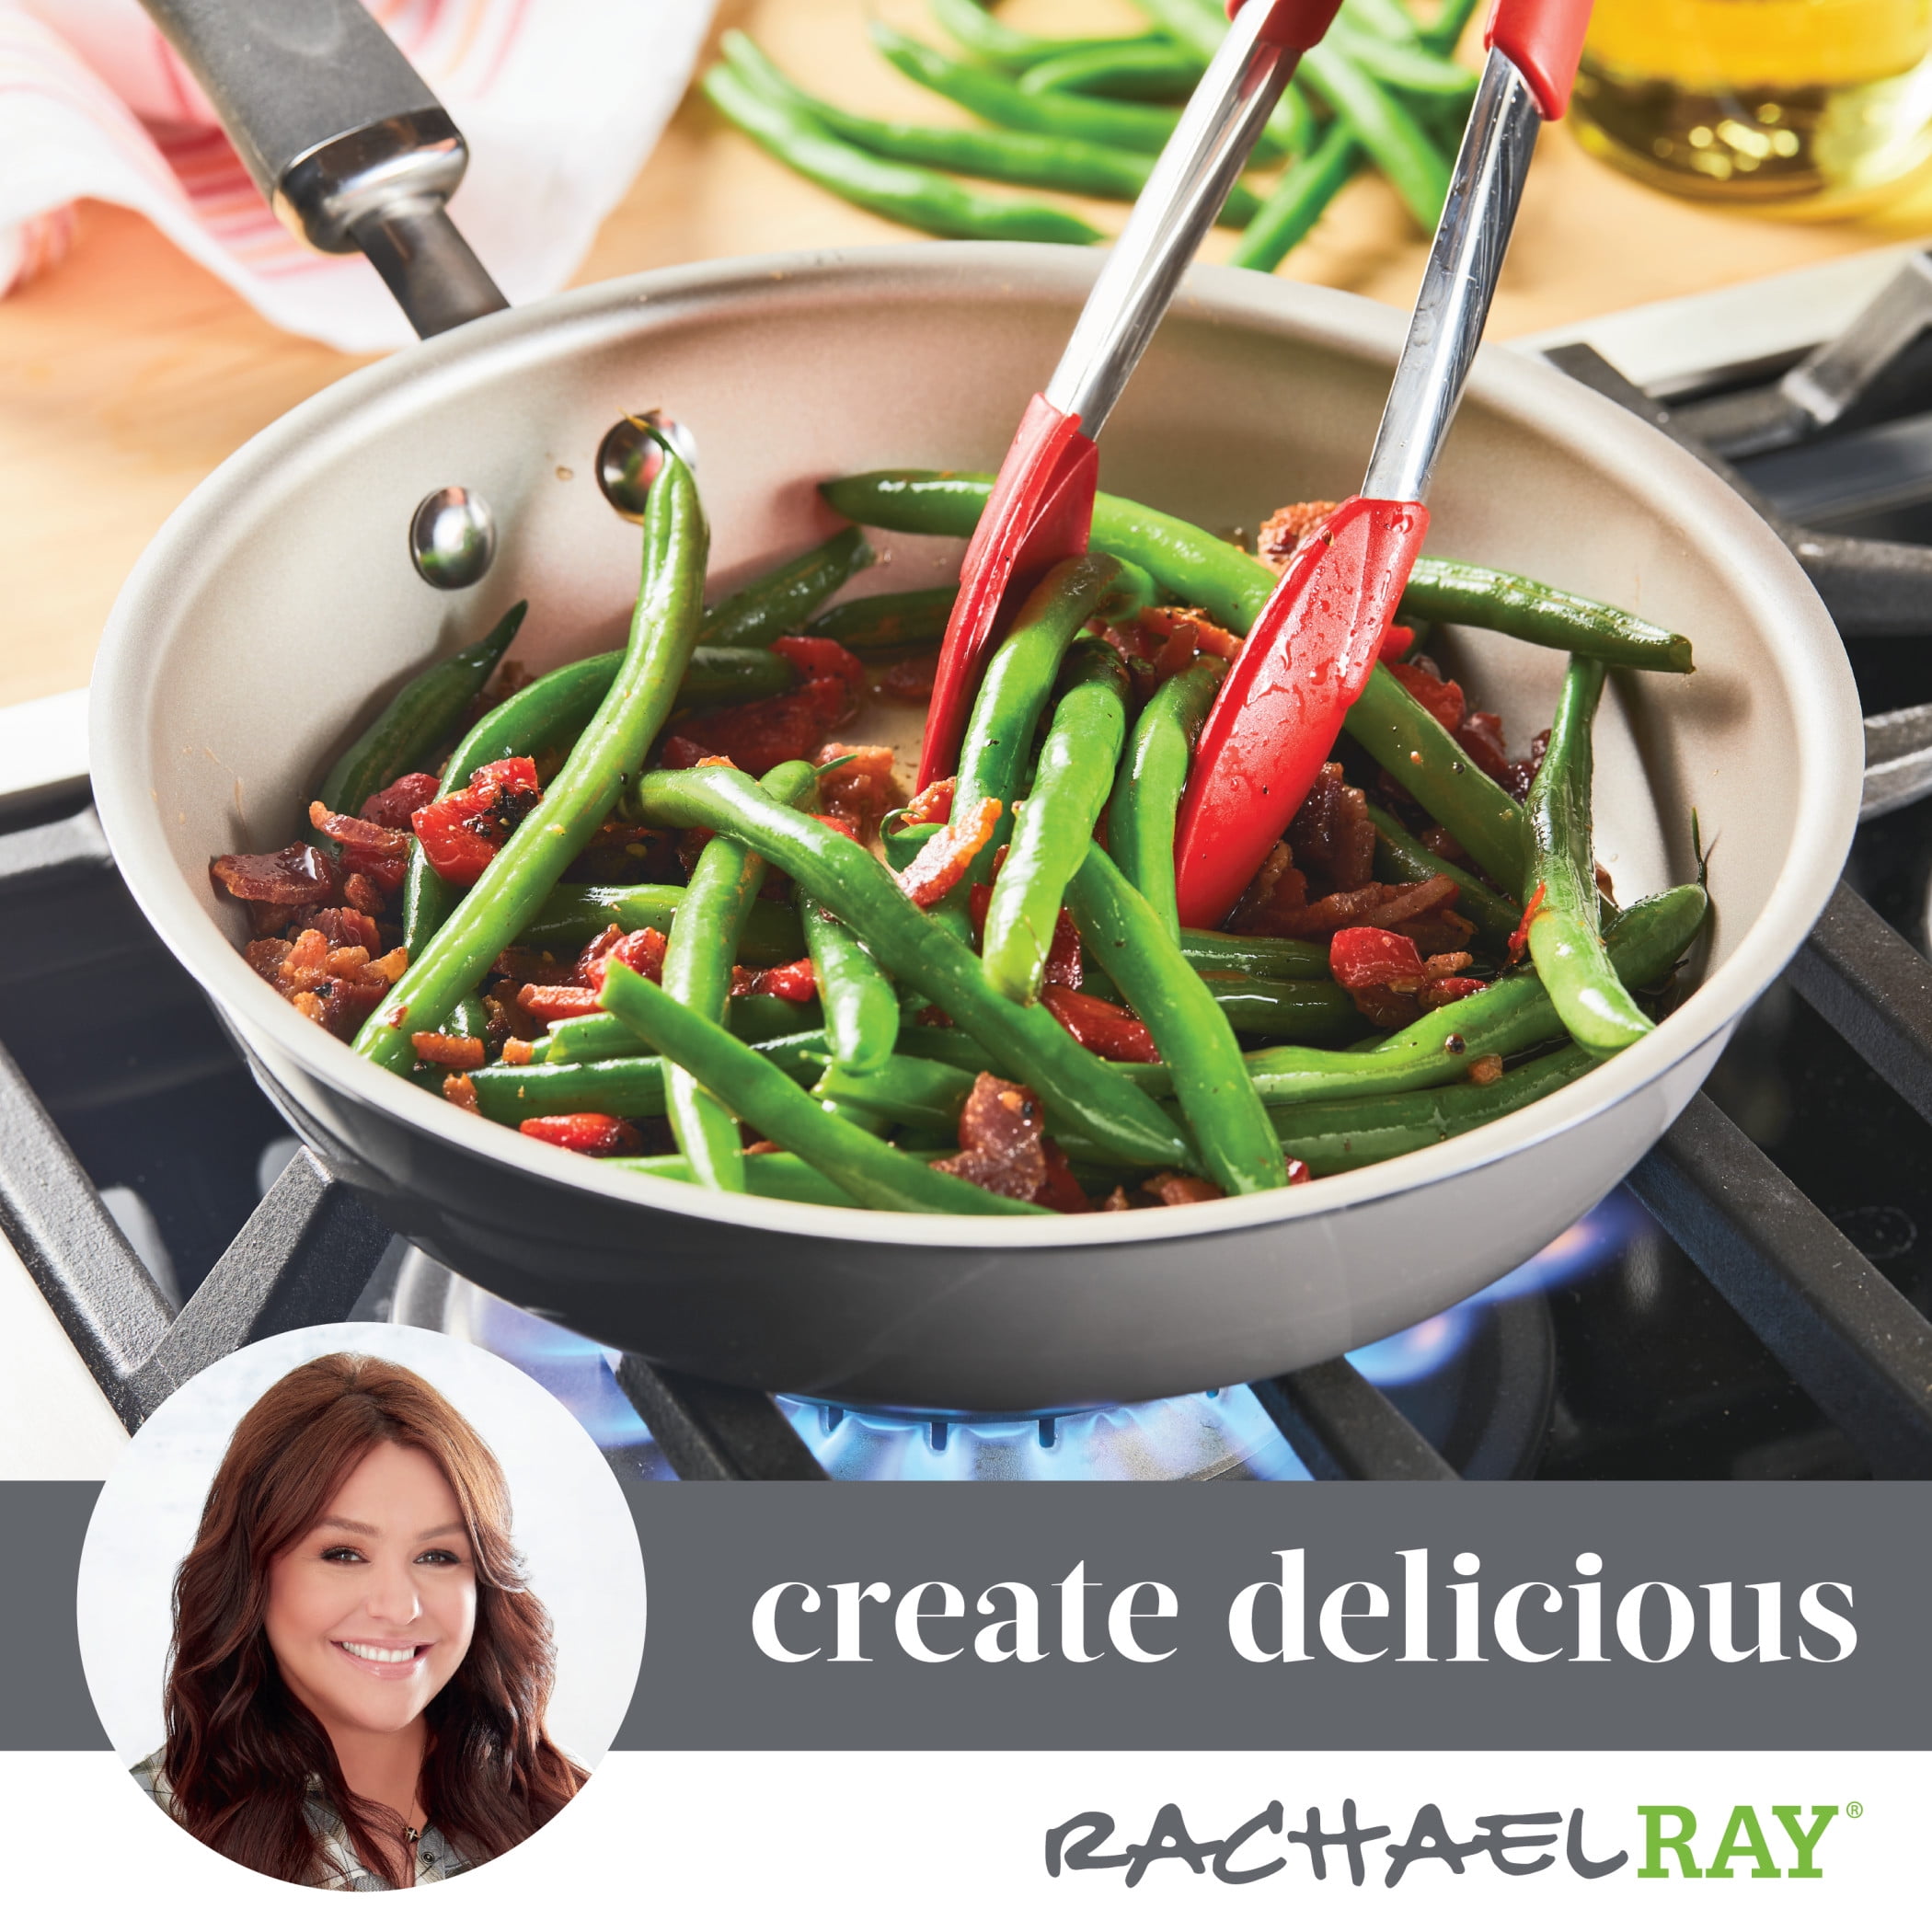 Rachael Ray 13 Piece Induction Safe Non-Stick Cookware Set